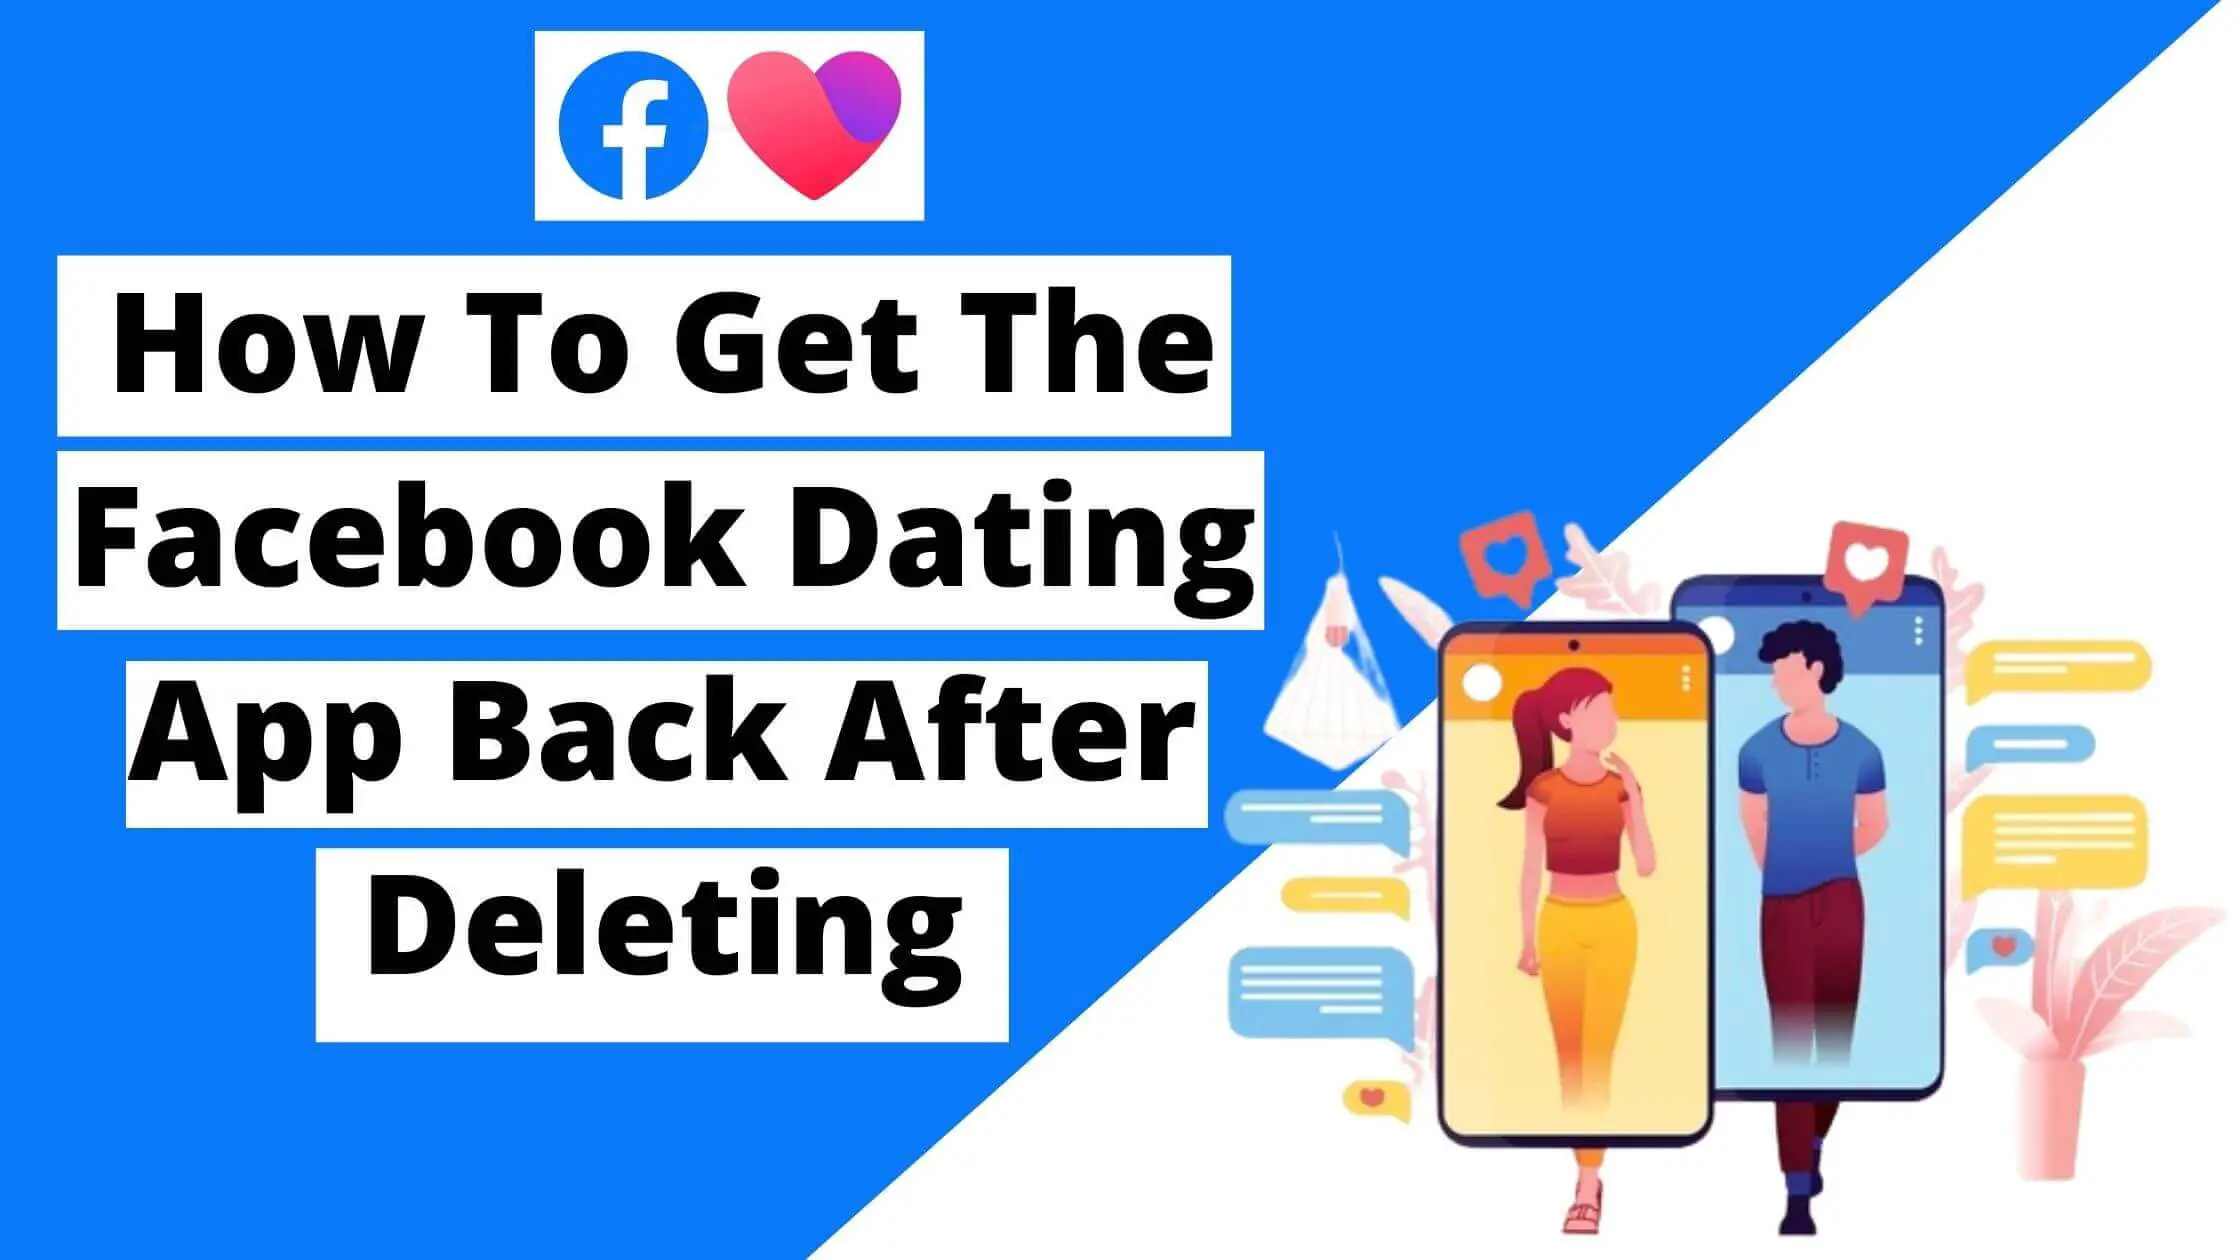 How To Get The Facebook Dating App Back After Deleting